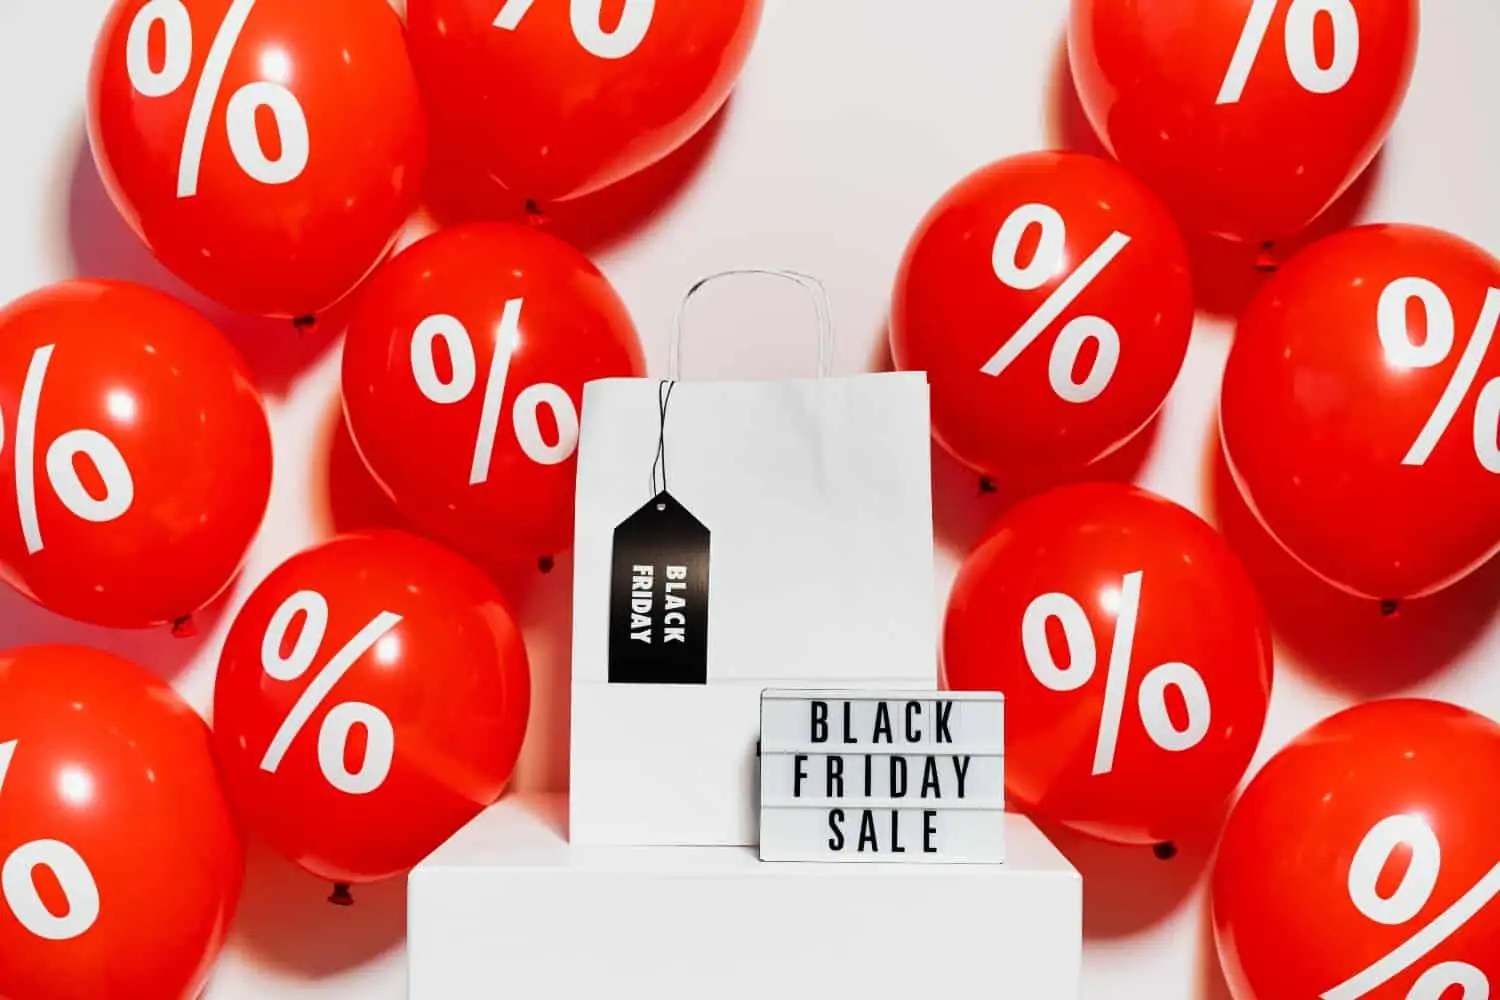 What NOT to Buy this Black Friday